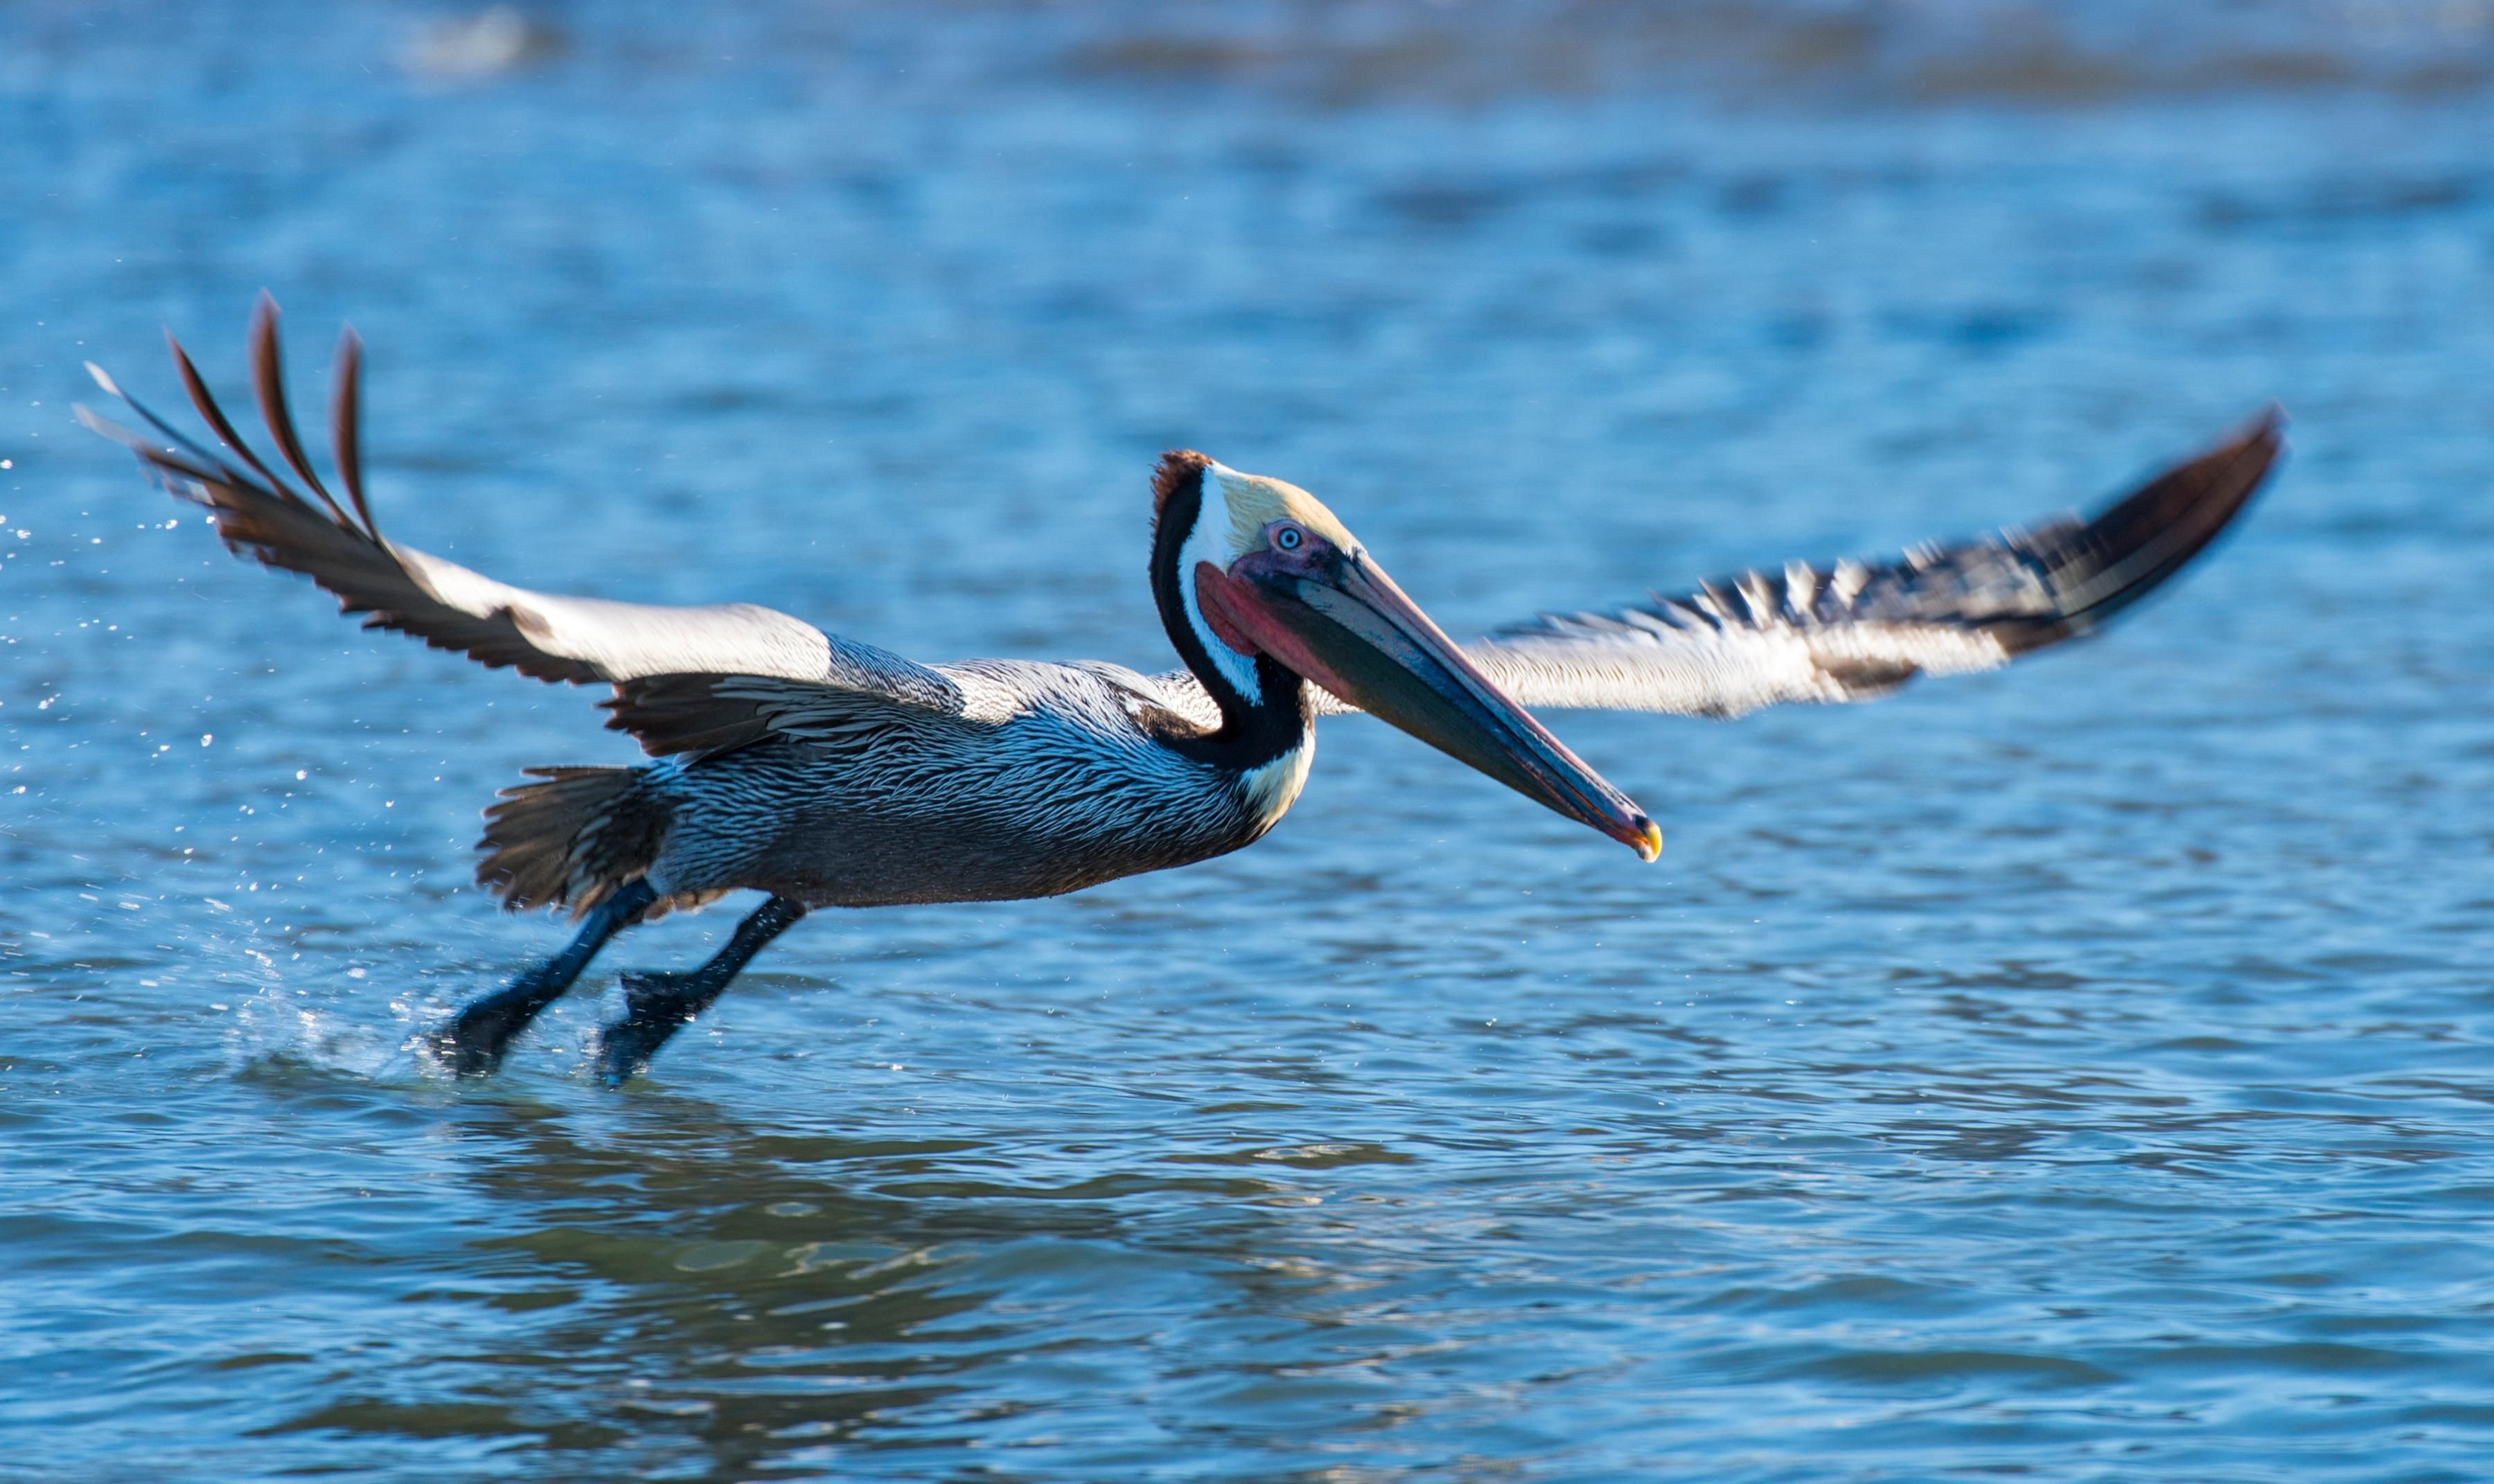 The Brown Pelican is endangered